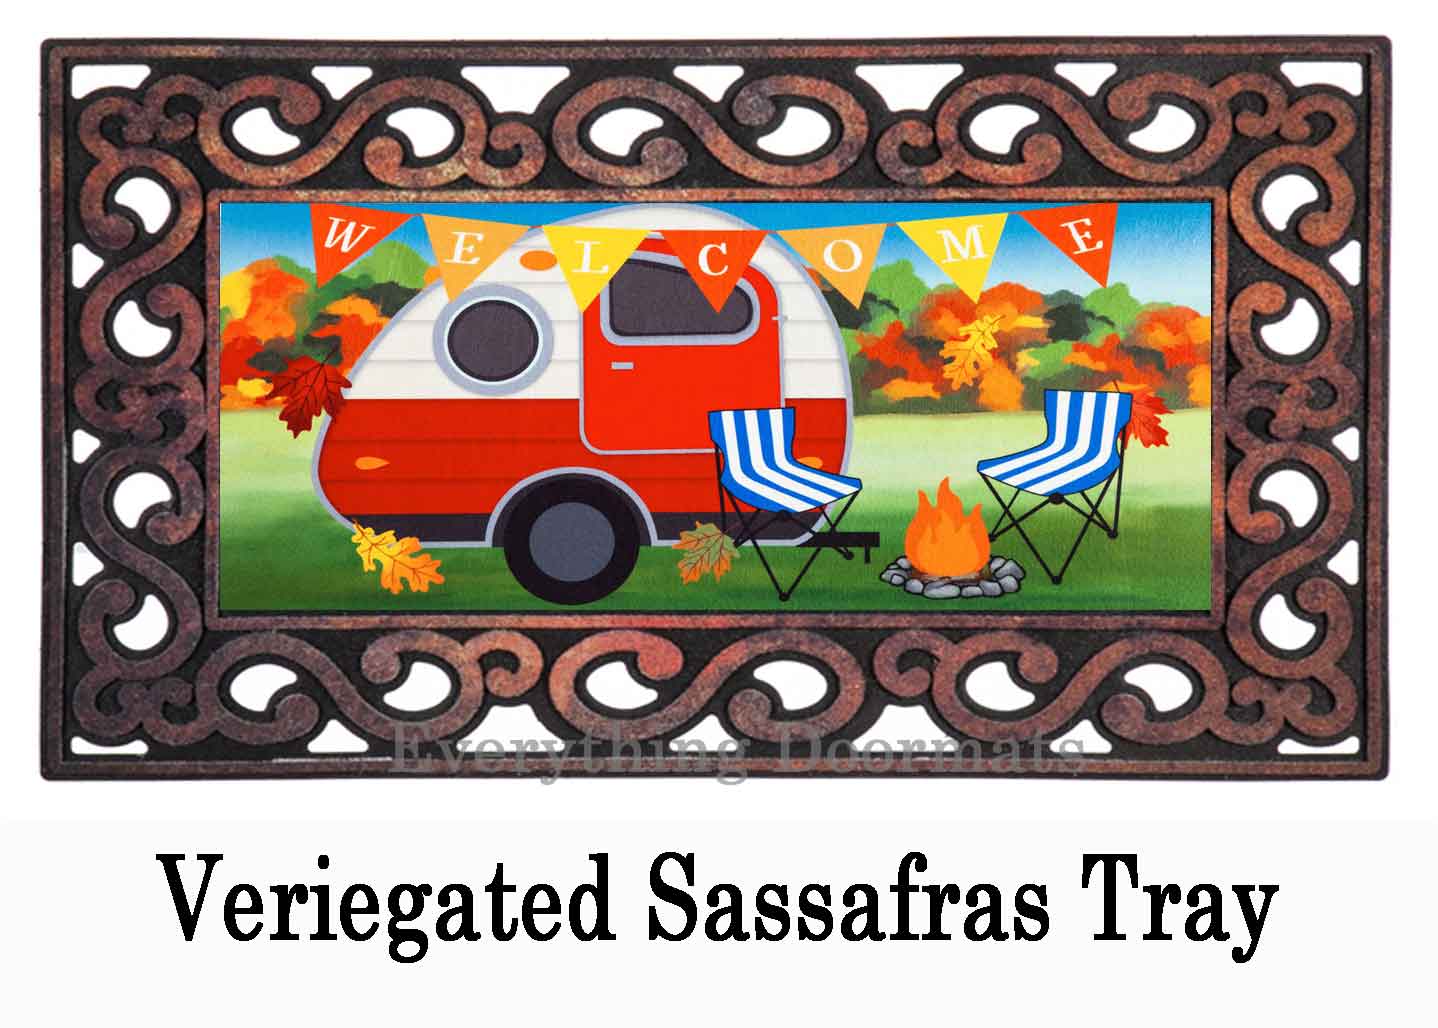 https://www.everythingdoormats.com/images/products/fall-camper-welcome-sassafras-switch-insert-doormat-in-variegated-rubber-tray.jpg